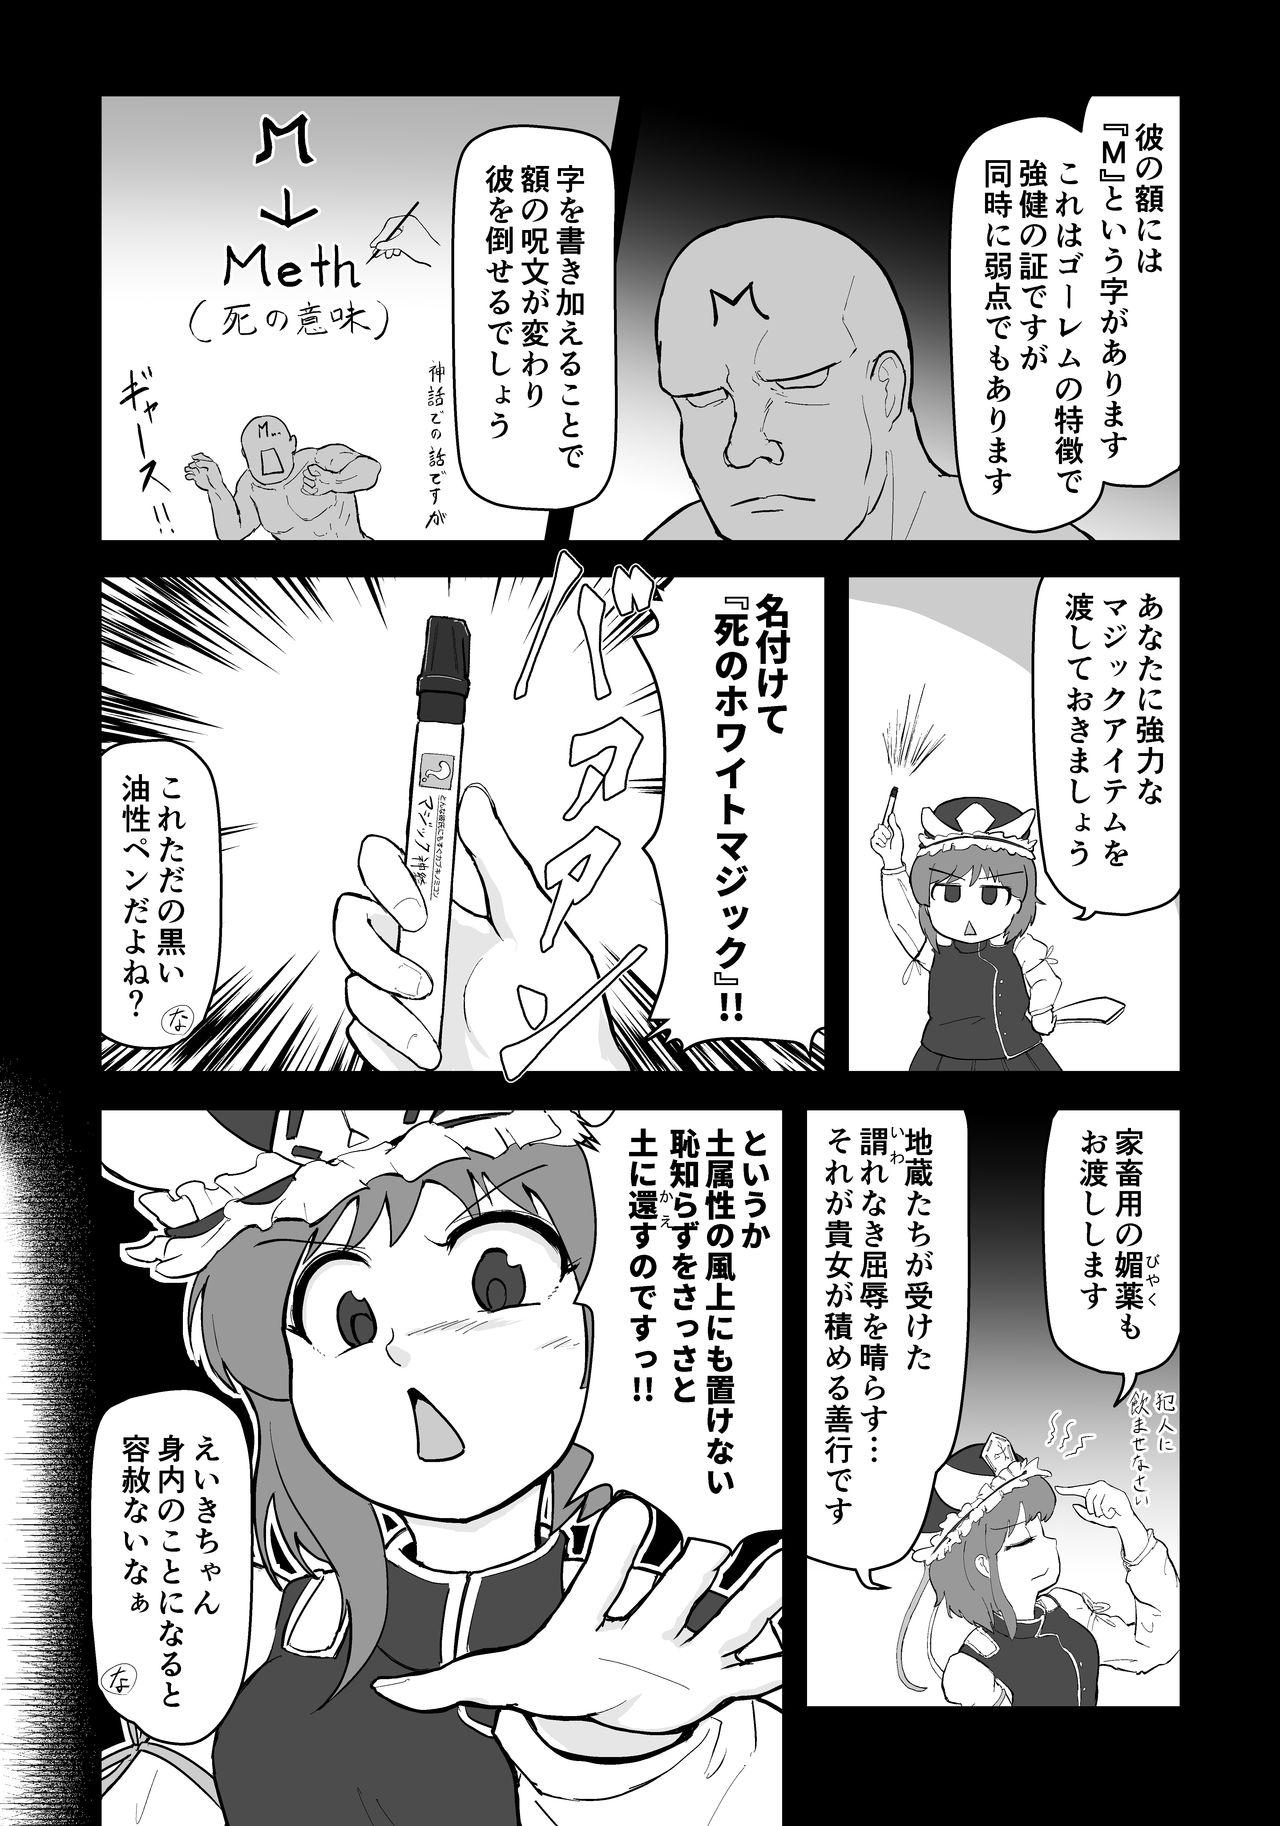 Milk I will mash you ! - Touhou project Hot Whores - Page 4